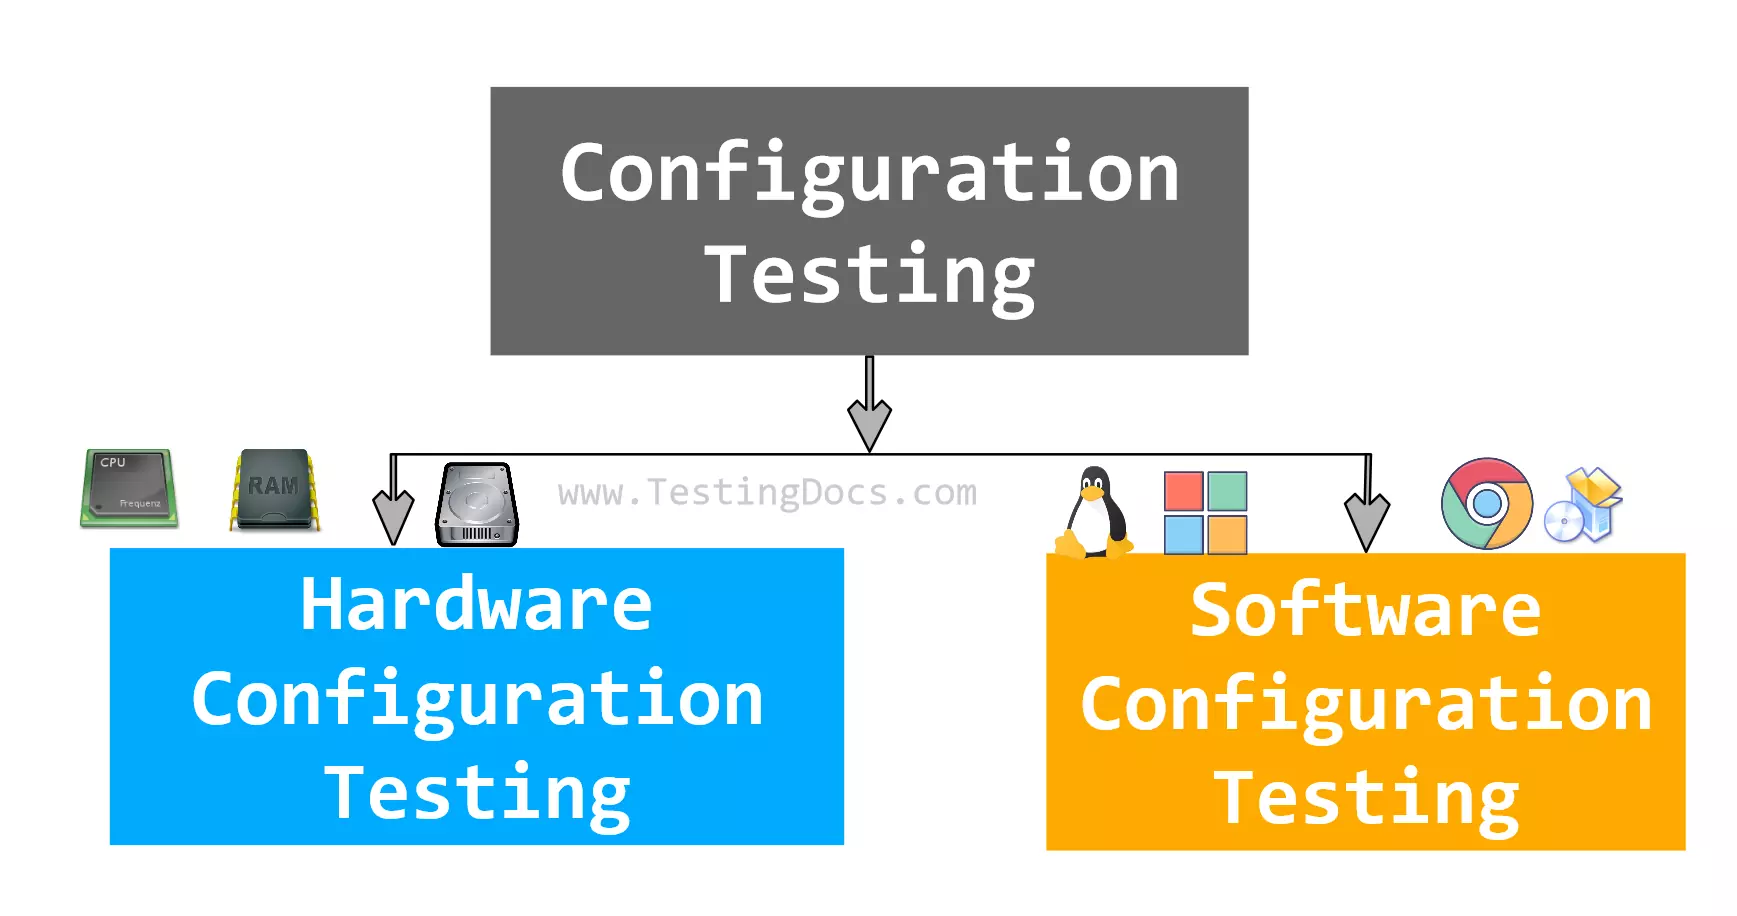 Types of Configuration Testing